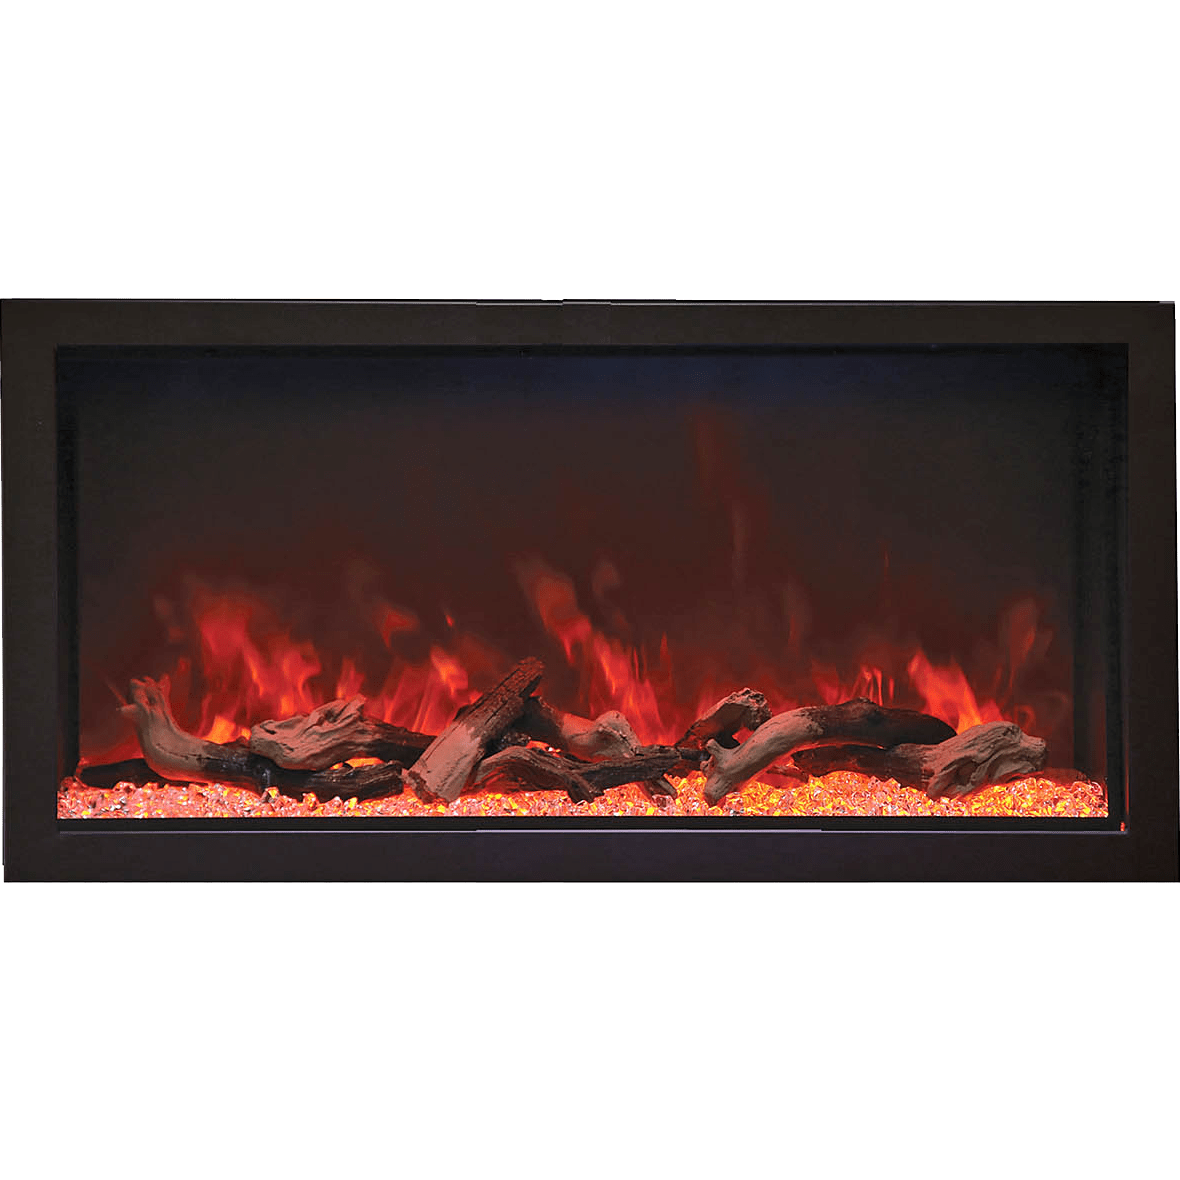 Remii Extra Tall Indoor/Outdoor Built-In Electric Fireplace - 45 Inch